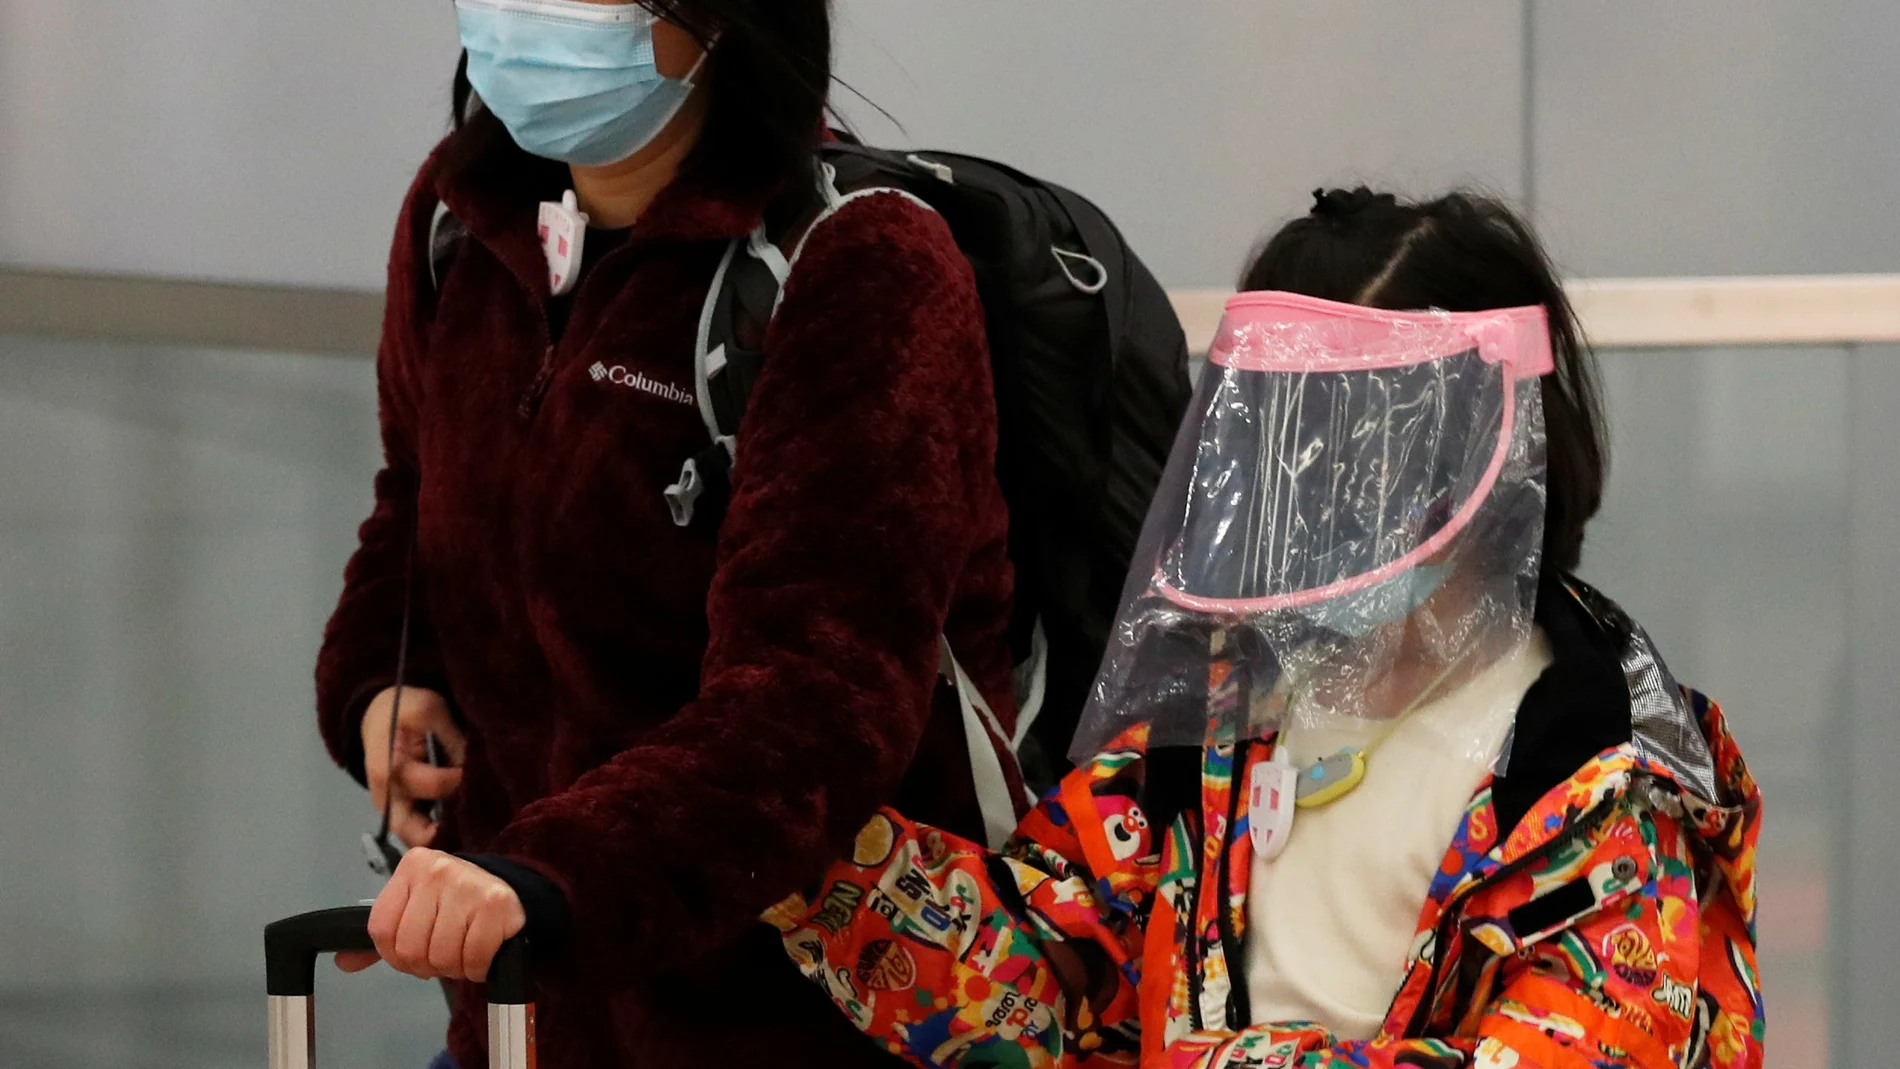 A child wears self made mask as she arrives at Hong Kong West Kowloon High Speed Train Station Terminus, before temporary closing, following the coronavirus outbreak in Hong Kong